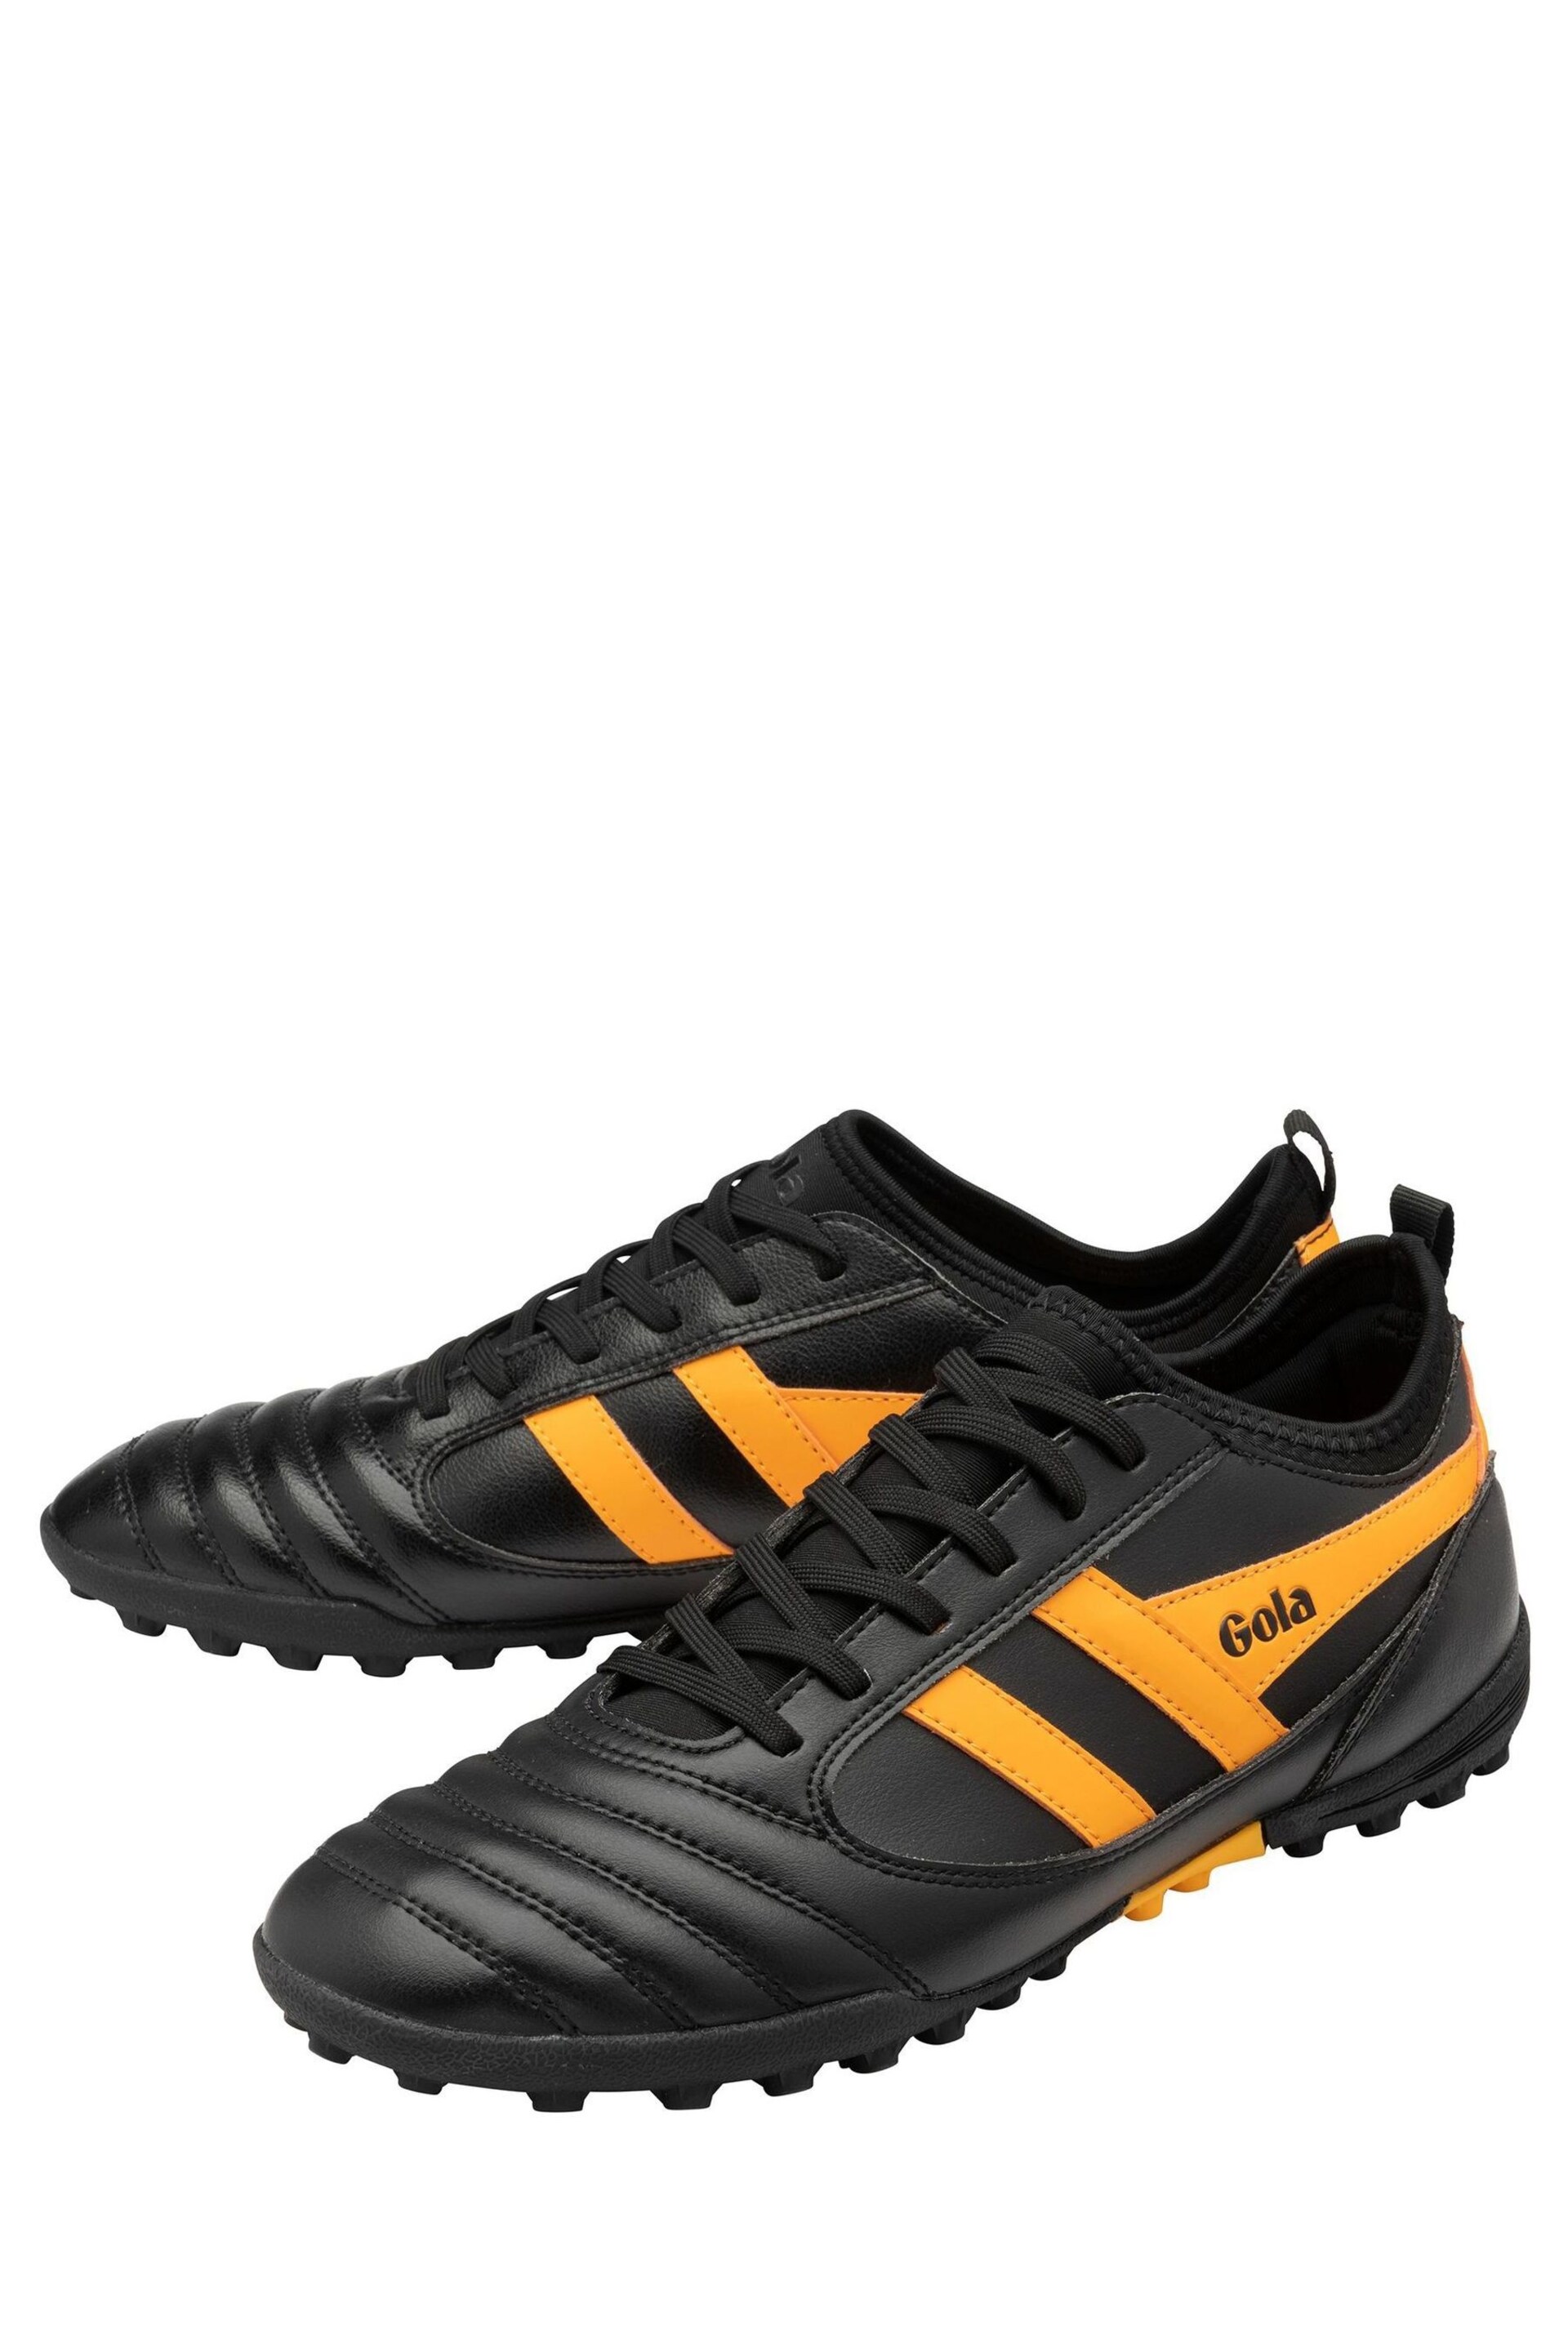 Gola Black Mens Ceptor Turf Microfibre Lace-Up Football Boots - Image 2 of 5